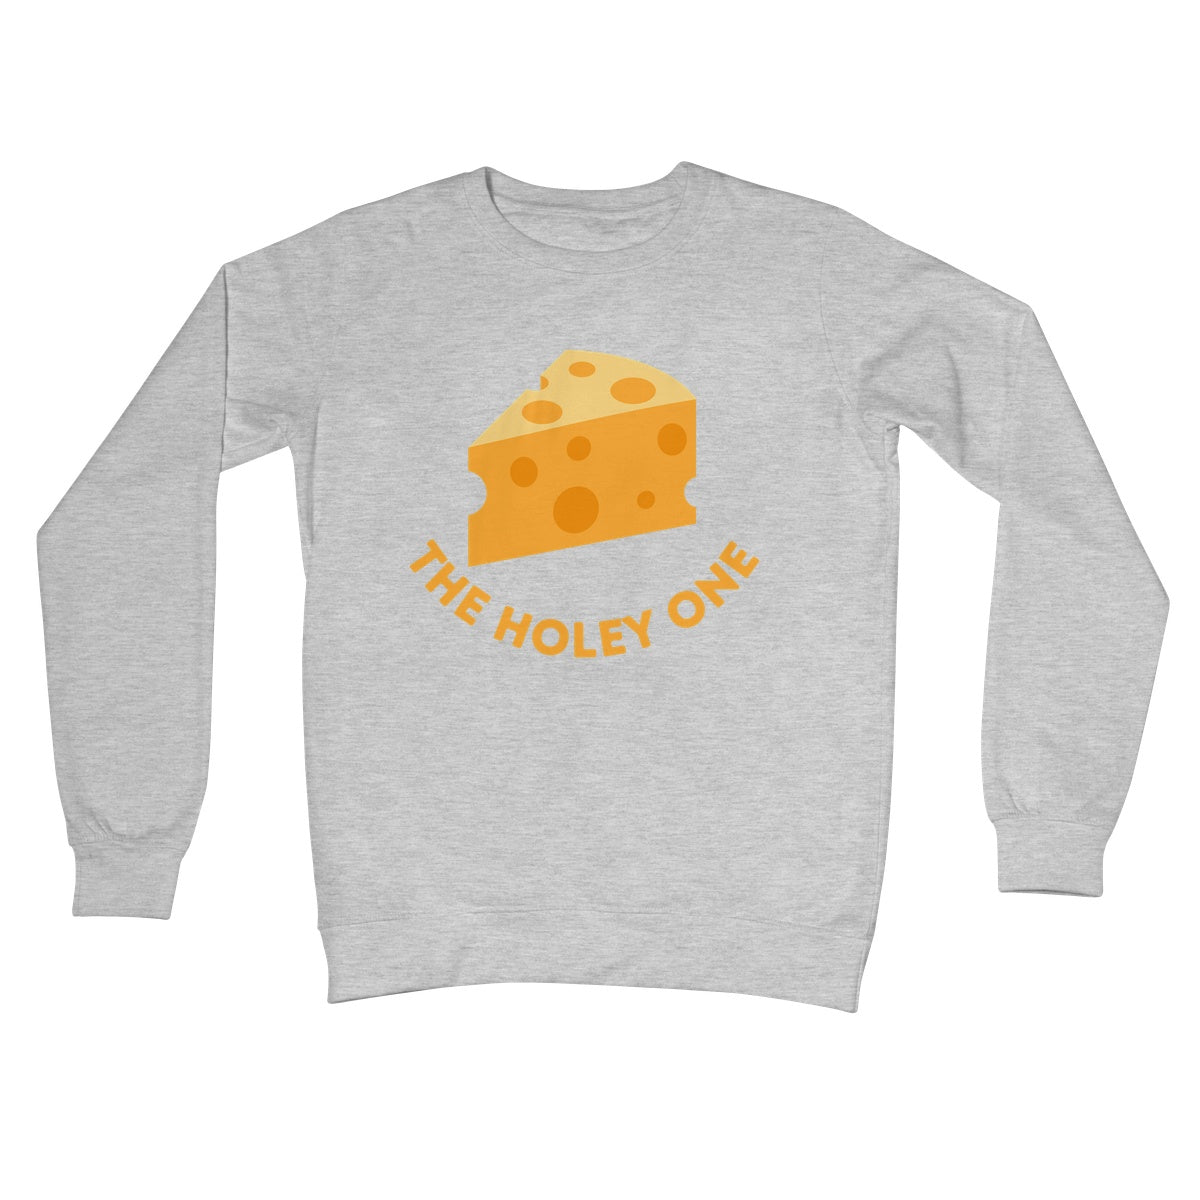 the holey cheese jumper grey